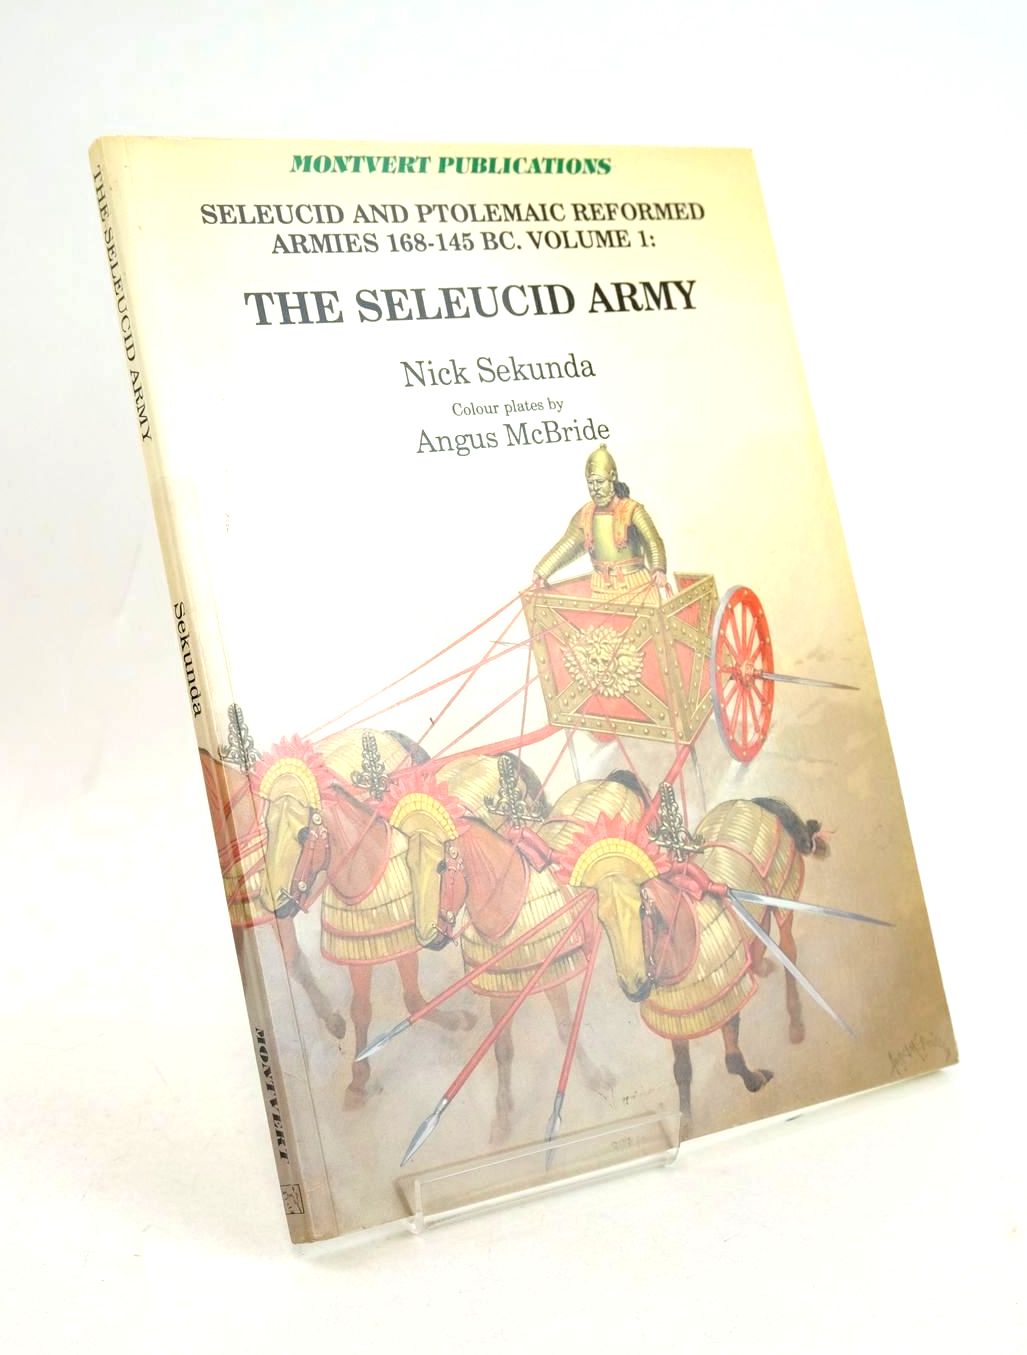 Photo of SELEUCID AND PTOLEMAIC REFORMED ARMIES 168-145 BC VOLUME 1: THE SELEUCID ARMY written by Sekunda, Nick illustrated by McBride, Angus published by Montvert Publications (STOCK CODE: 1327282)  for sale by Stella & Rose's Books